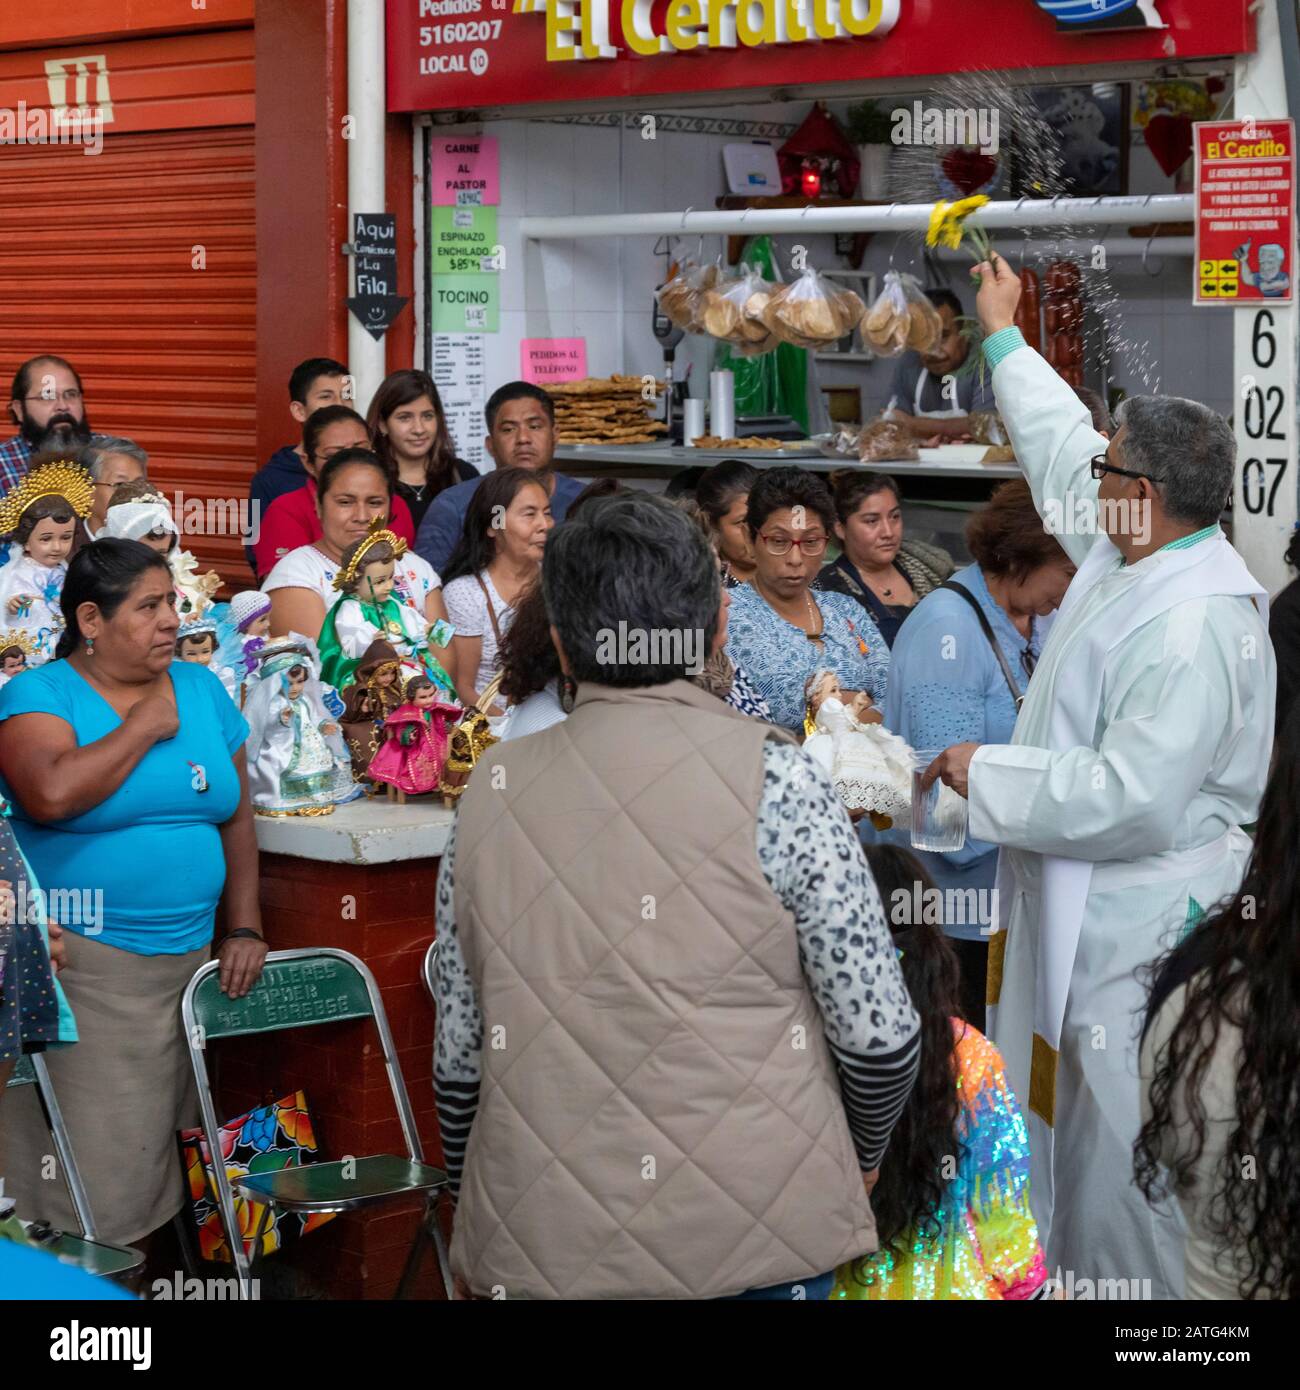 Oaxaca de Juarez, Mexico. 2nd Feb, 2020. Fr. Hector Zavala Balboa celebrates mass at the Sanchez Pascuas neighborhood market on the Dia de la Candelaria, celebrating 40 days after the birth of Jesus. Families dress up dolls of the Baby Jesus and take them to mass to be blessed. Credit: Jim West/Alamy Live News Stock Photo